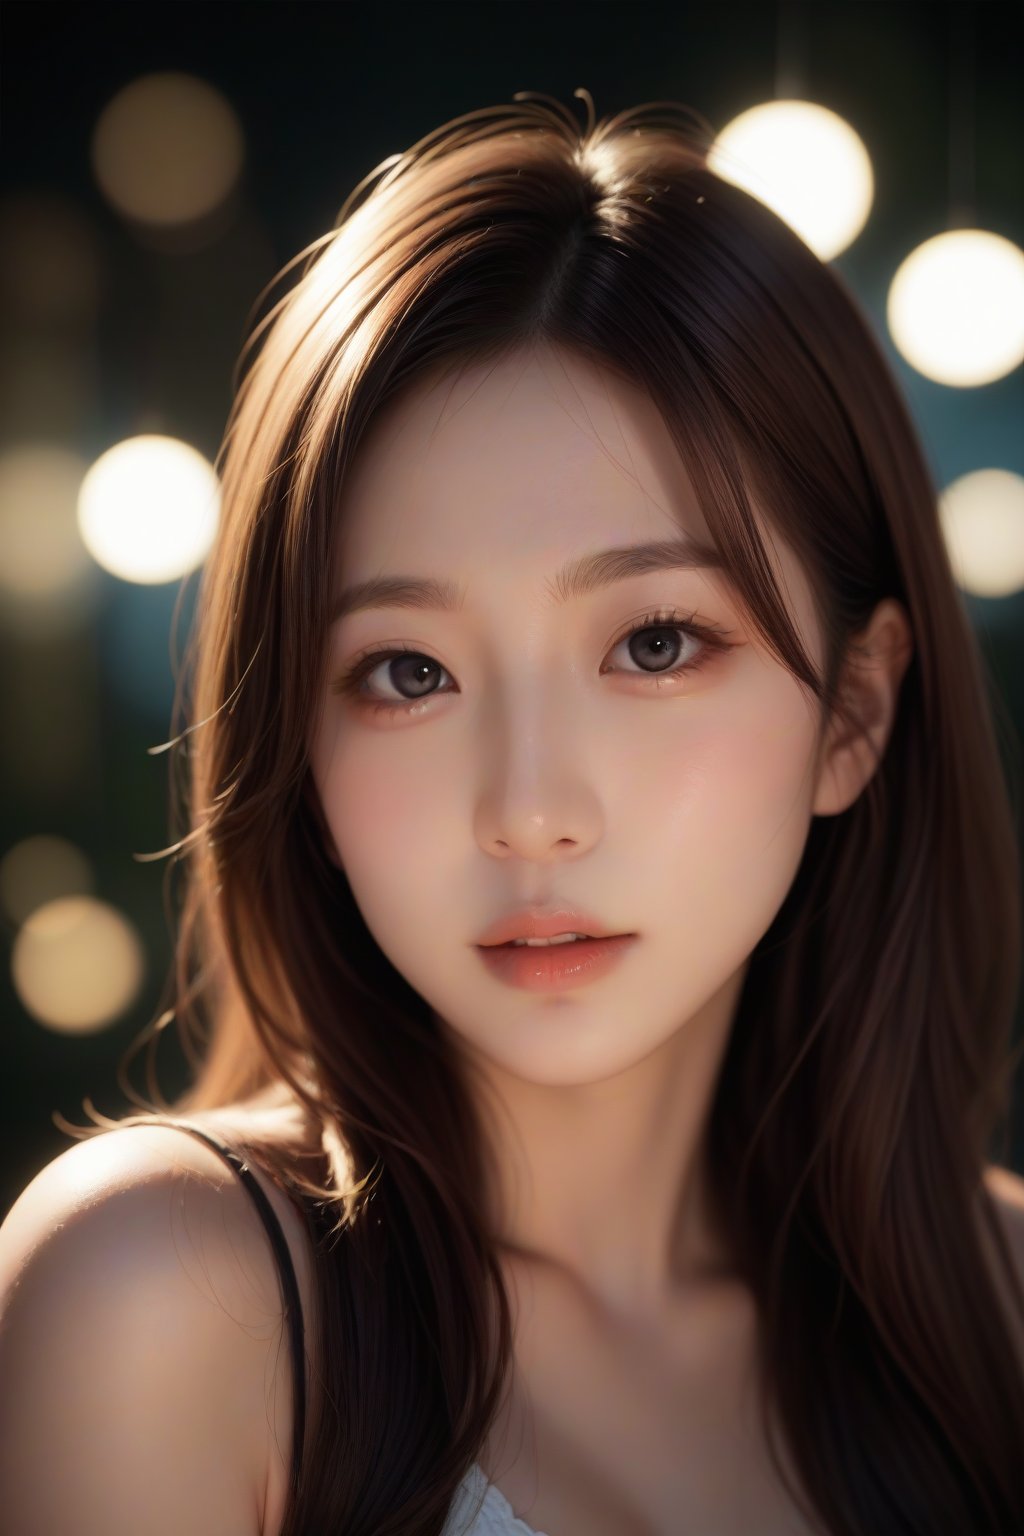 score_9, score_8_up, score_7_up, masterpiece, best quality, 
BREAK
1girl, solo, Japanese girl, long hair, brown hair, upper body, black eyes, lips, realistic, out of focus foreground and background, depth of field, soft bokeh, soft lighting bathes the body and face, 